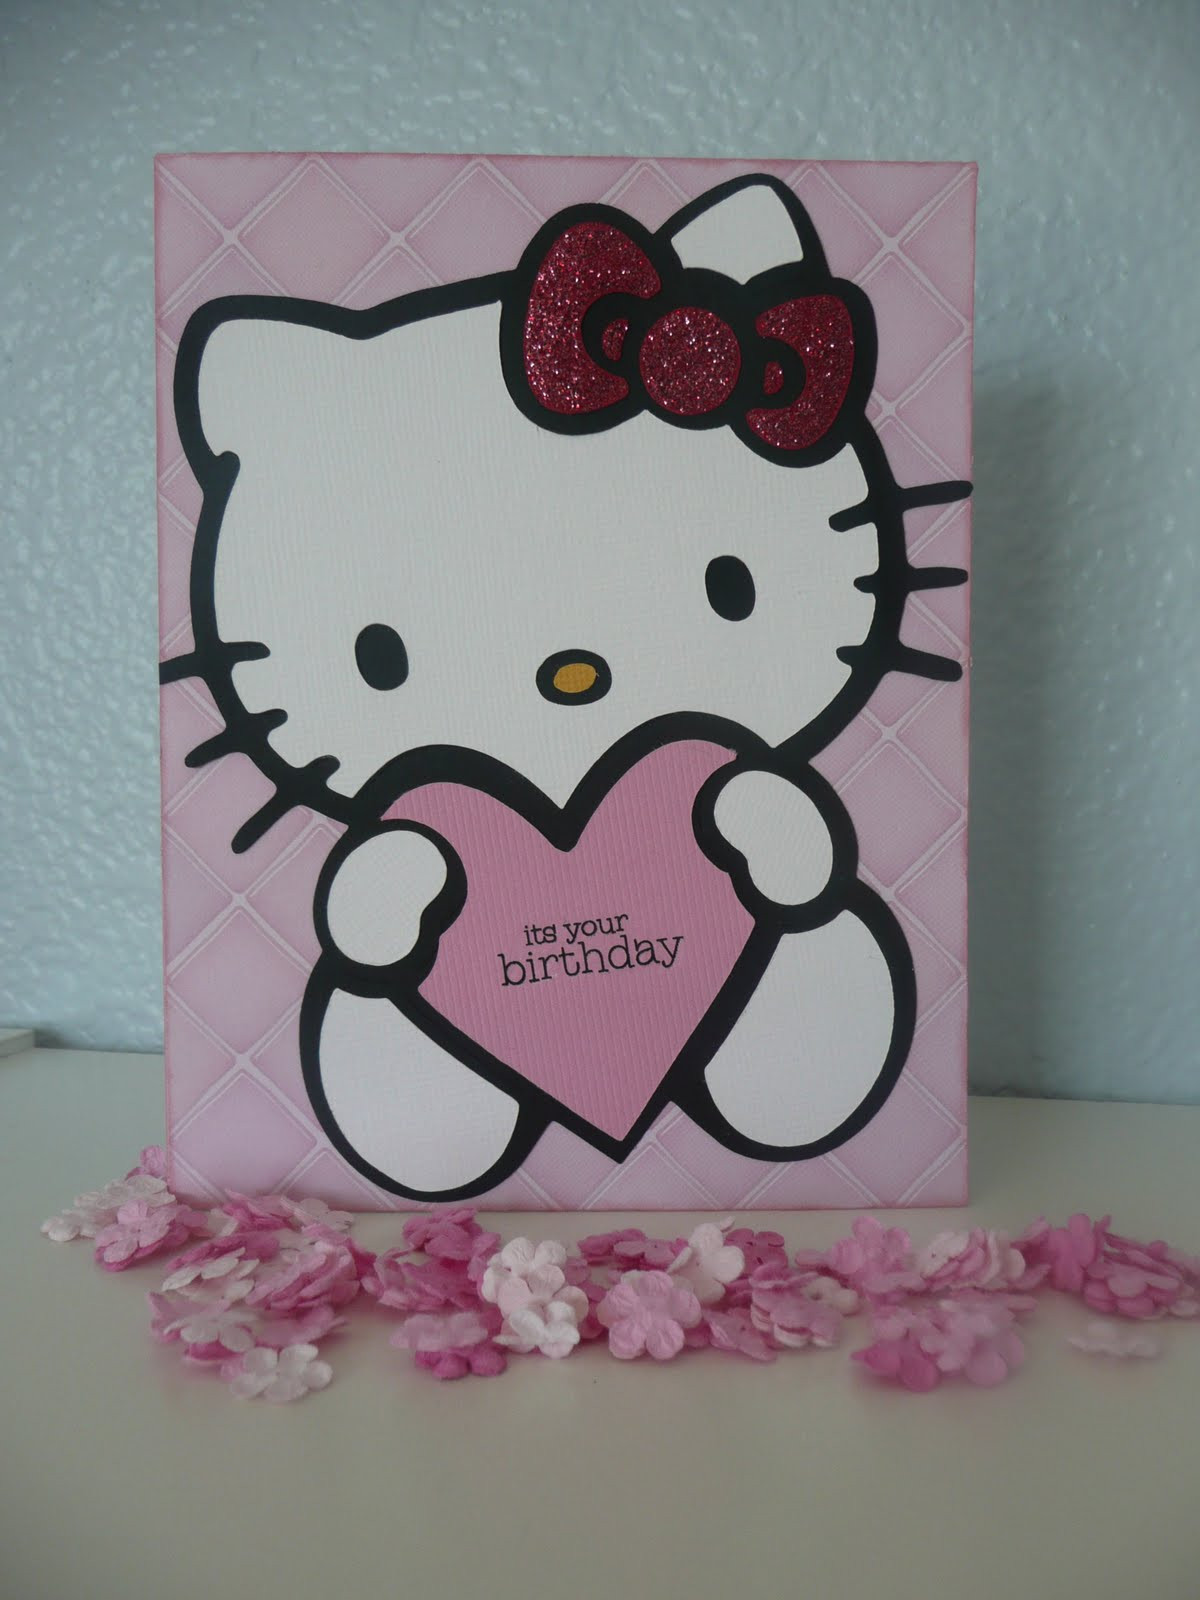 Hello Kitty Birthday Card
 A SCRAPPING MOM S SCRAPS HELLO KITTY BIRTHDAY CARD